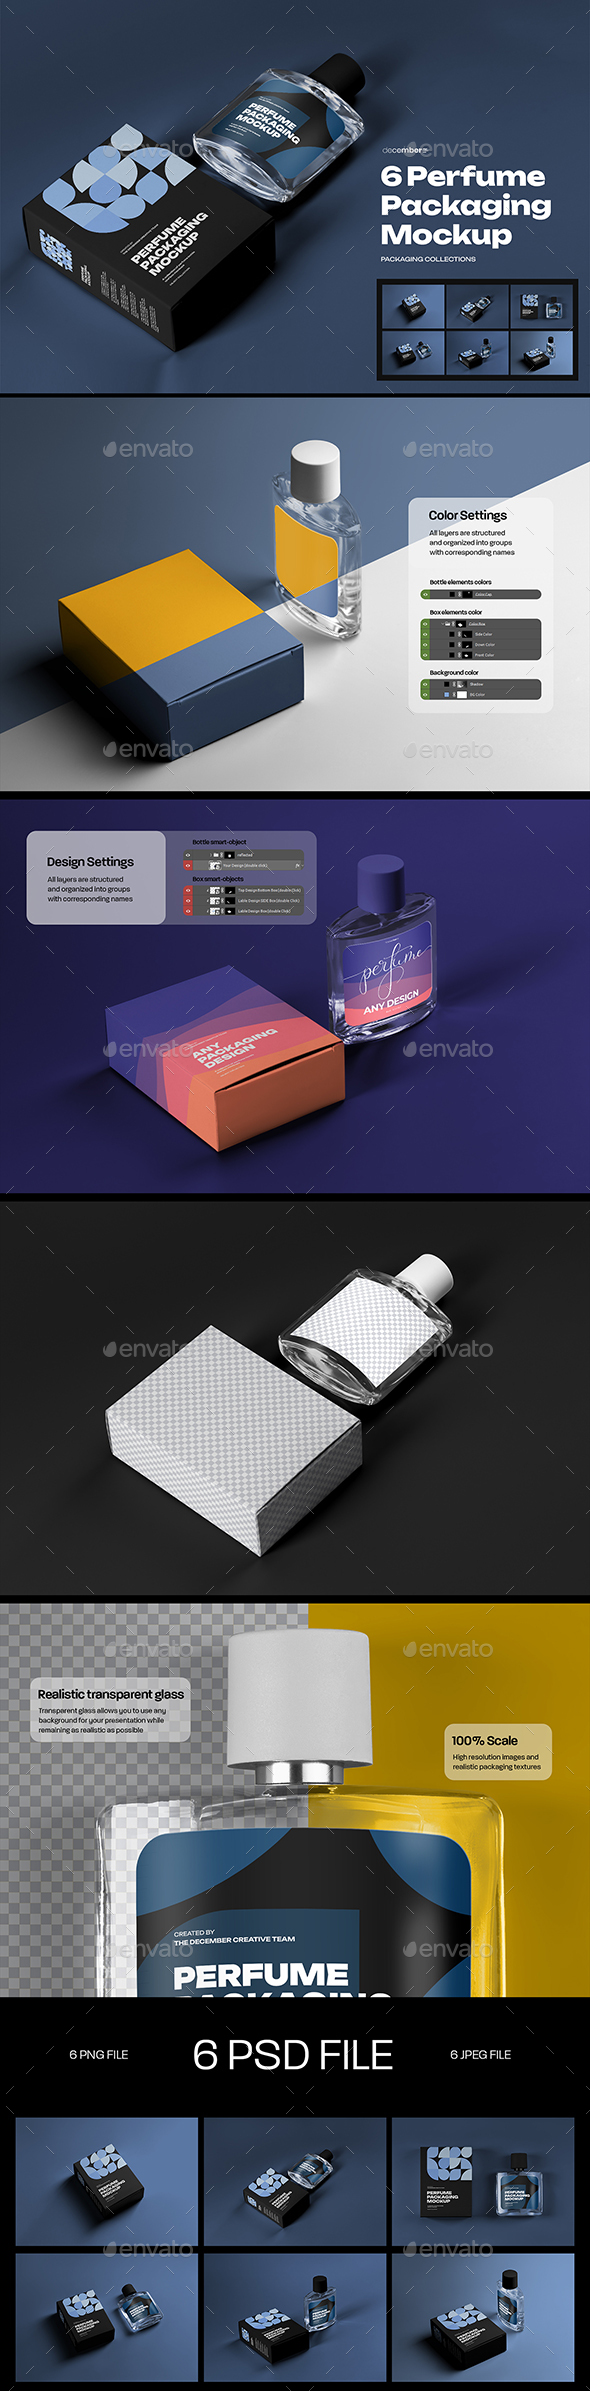 6 Perfume Packaging Mockups. Box and Bottle